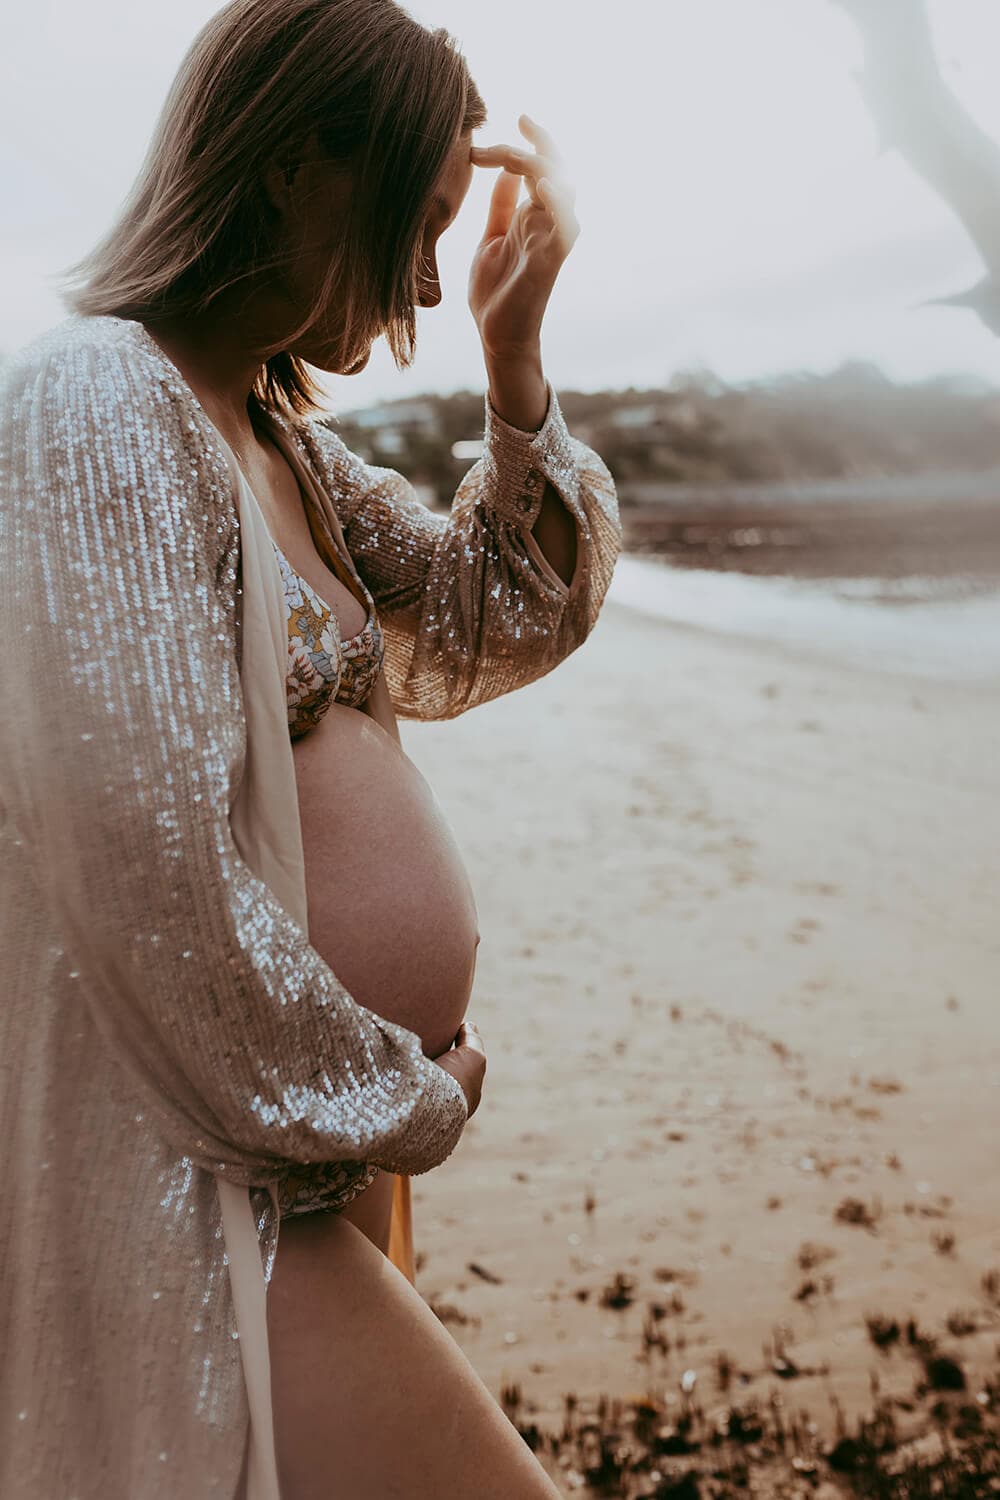 A woman brushes hair from her face and gently holds her other hand on her pregnant belly. She's at the beach.